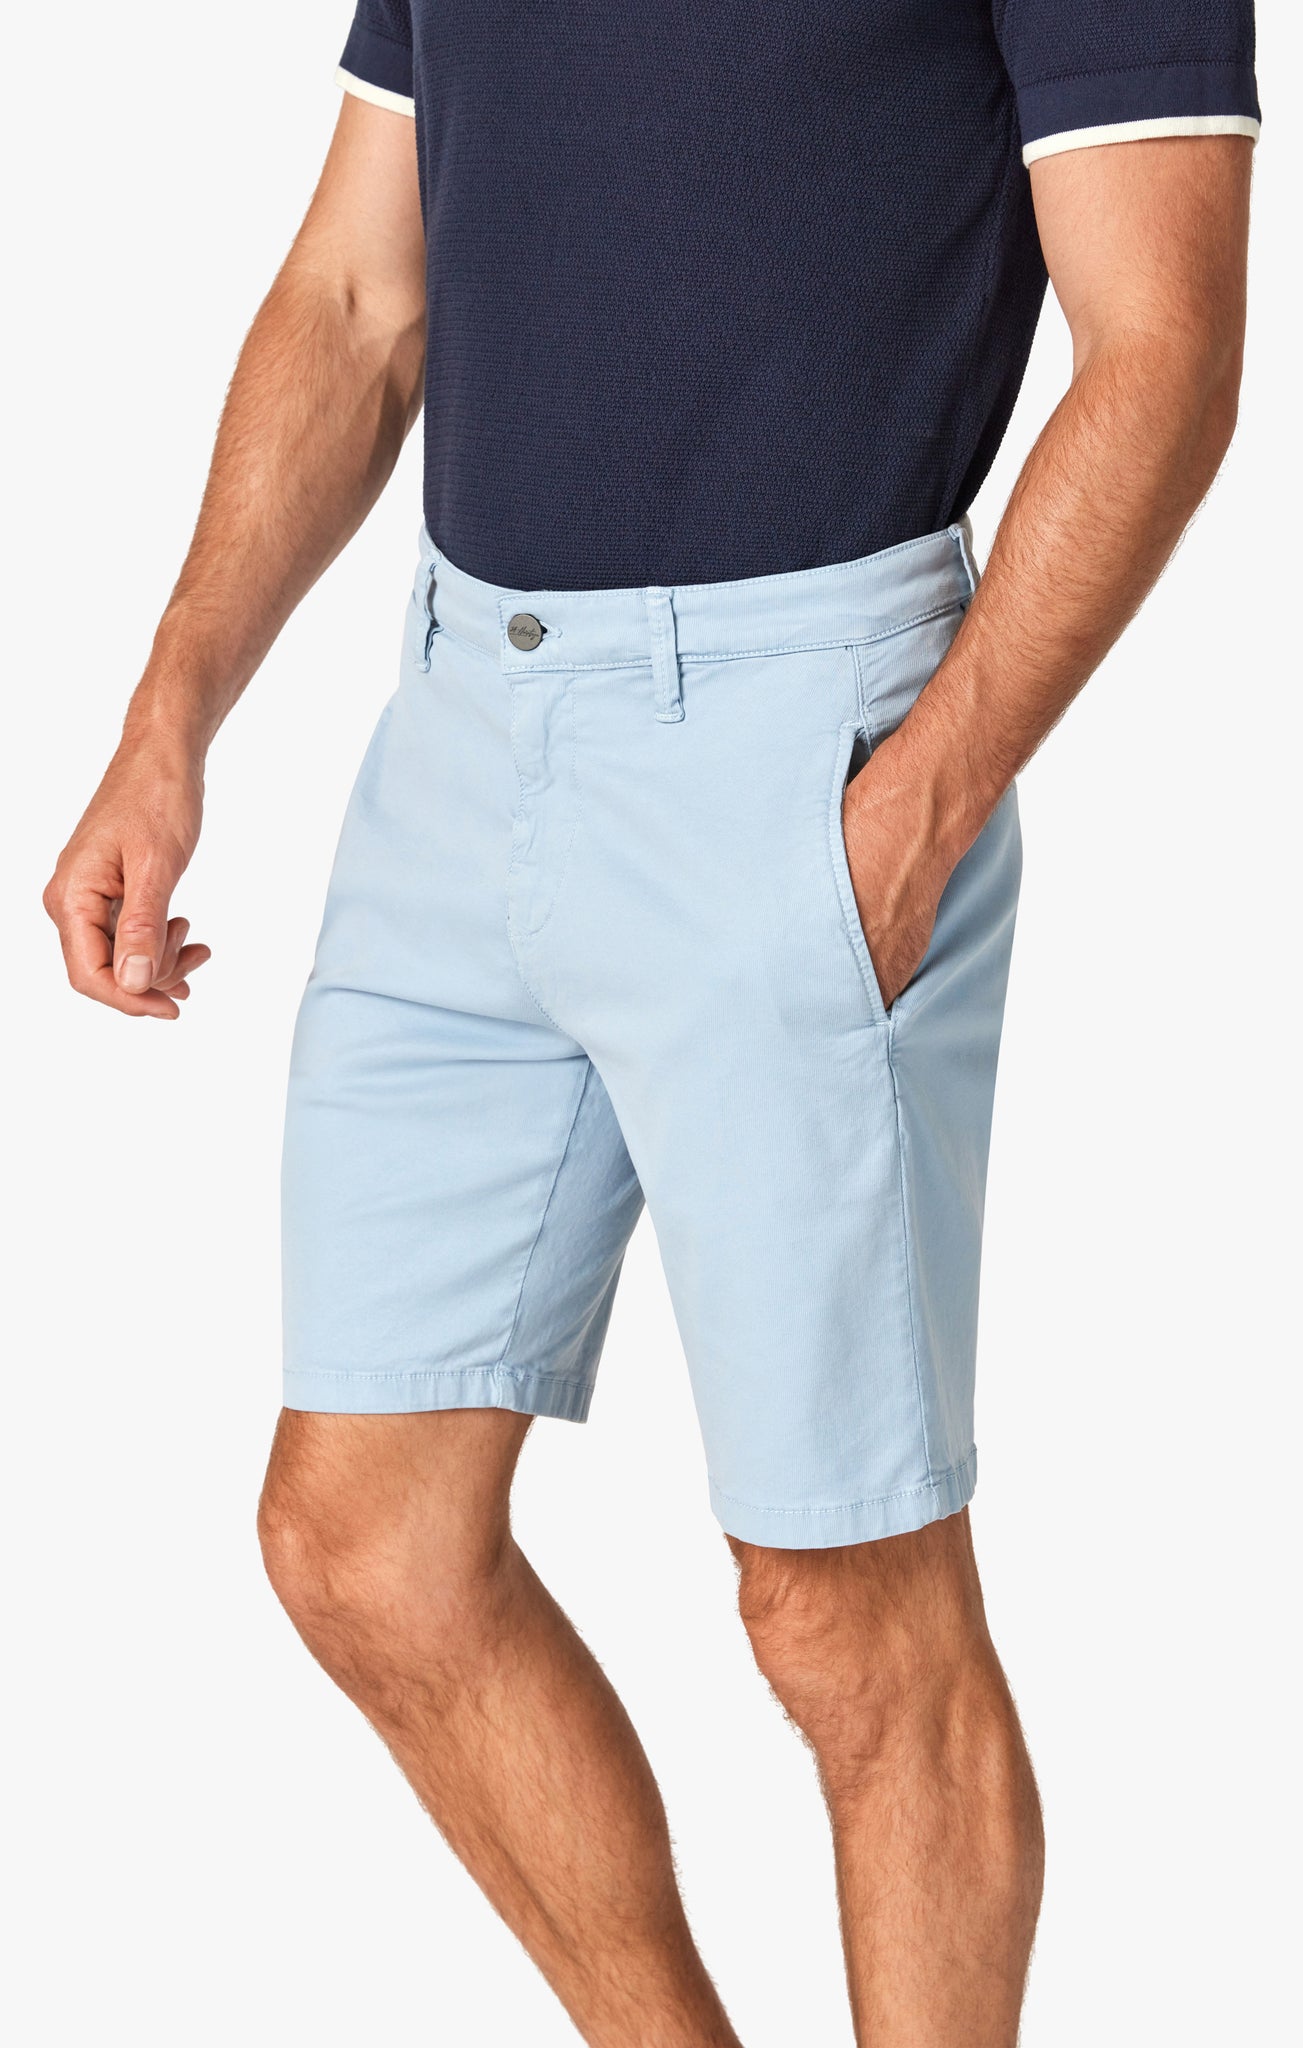 Nevada Shorts In Faded Denim Soft Touch